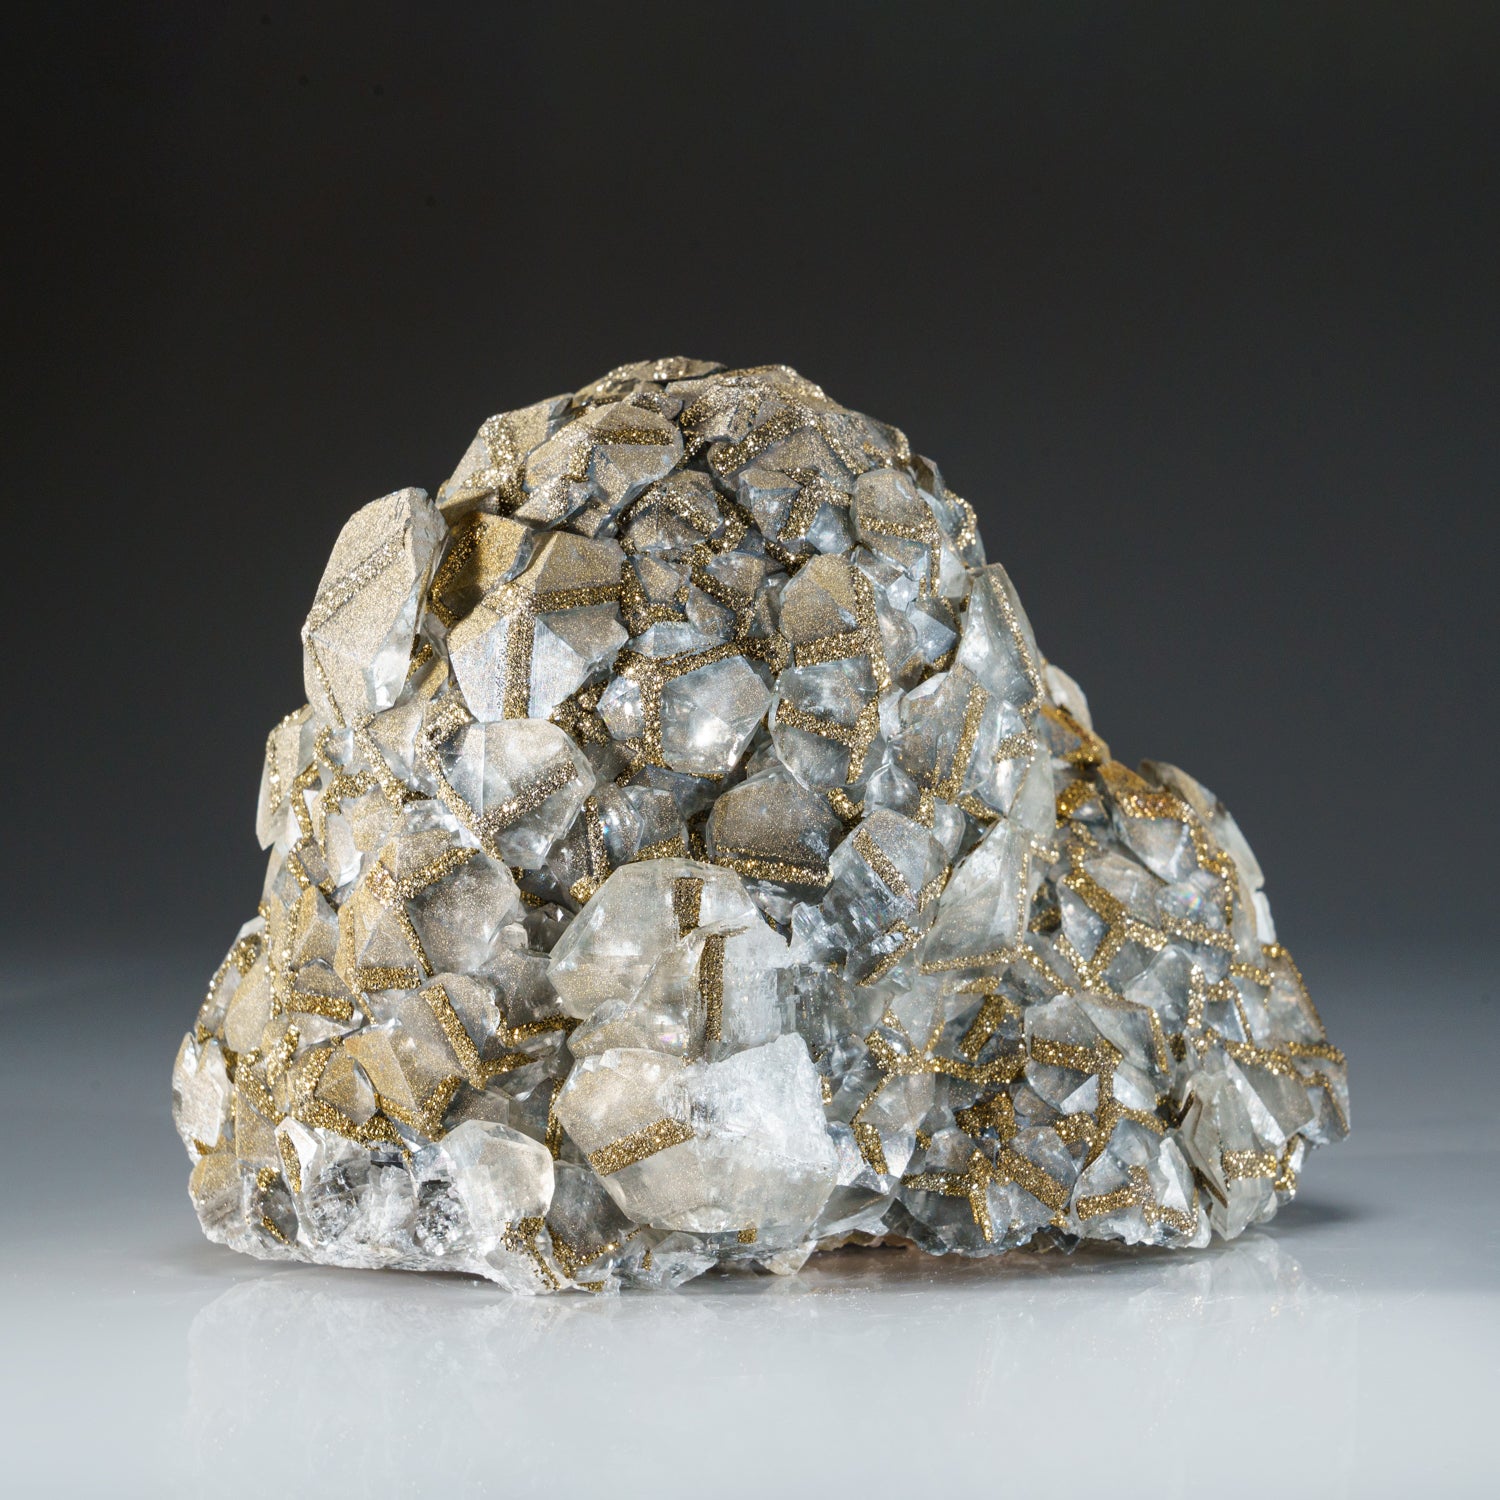 Mercedes Calcite with Pyrite Crystal Cluster from China